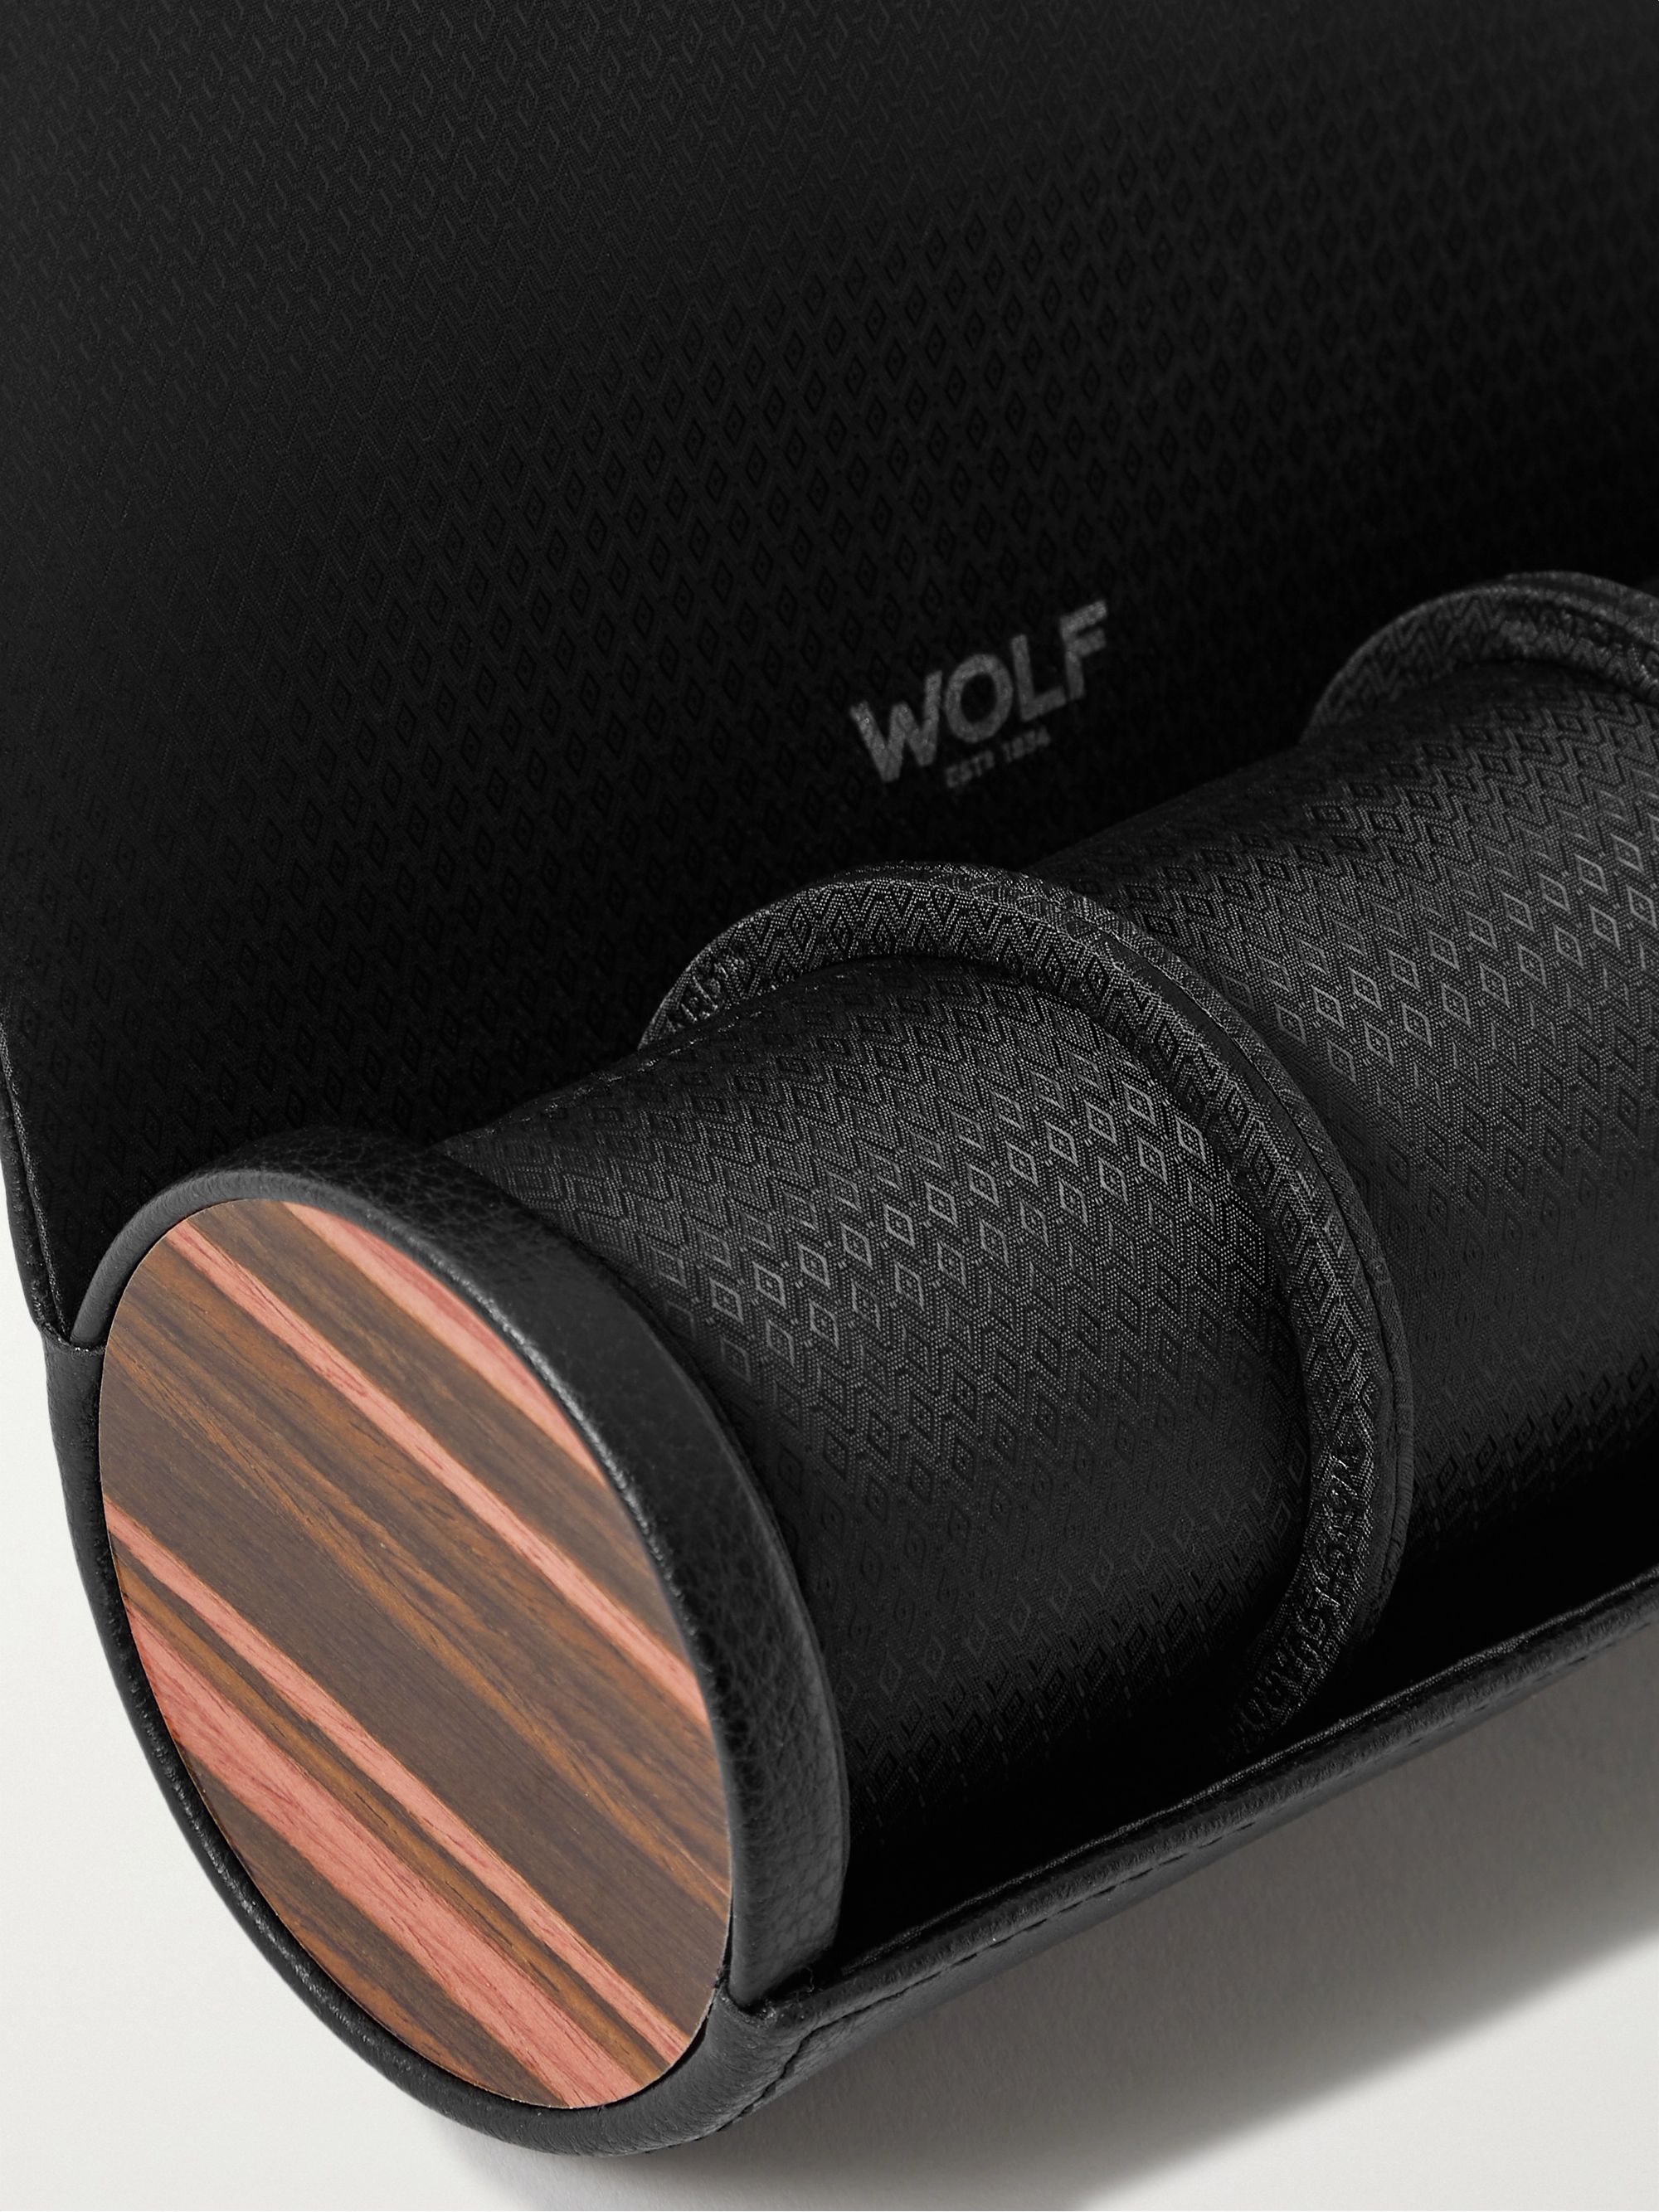 WOLF Roadster Full-Grain Vegan Leather and Macassar Wood Watch Roll